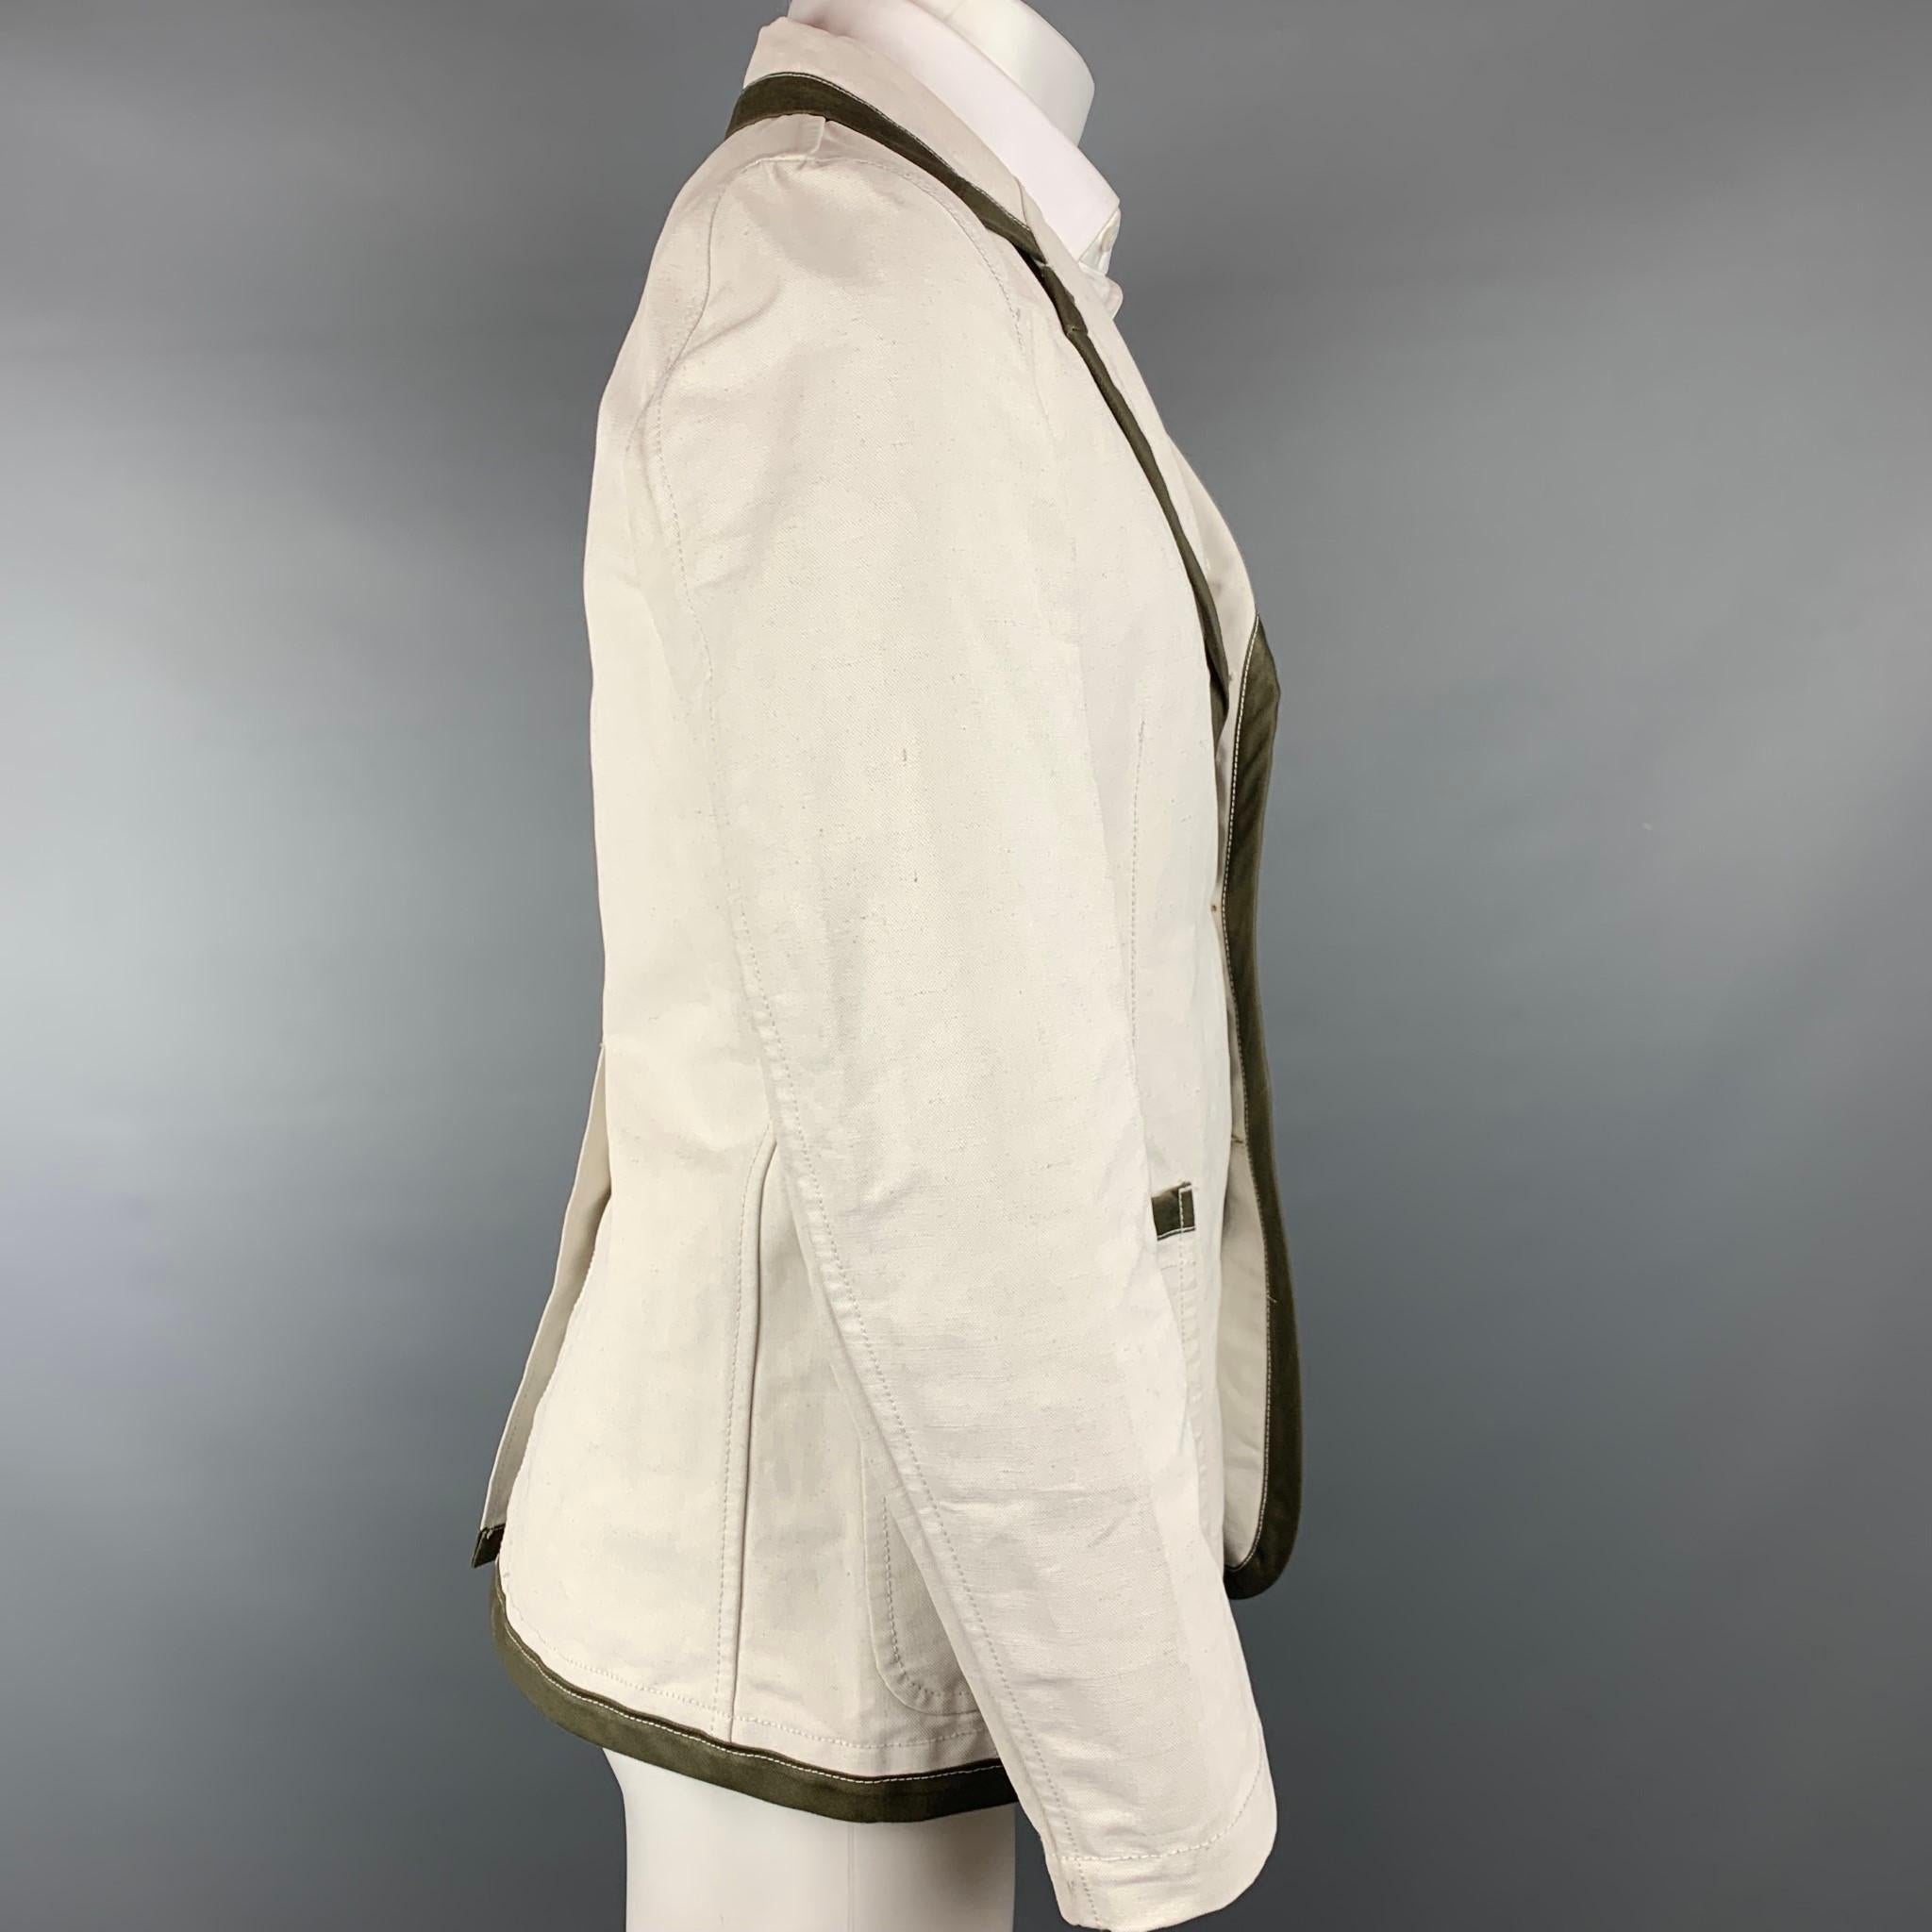 COMME des GARCONS sport coat comes in a off white linen / cotton with a olive trim featuring a notch lapel, patch pockets, and a three button closure. Made in France. 

Very Good Pre-Owned Condition.
Marked: M

Measurements:

Shoulder: 16.5